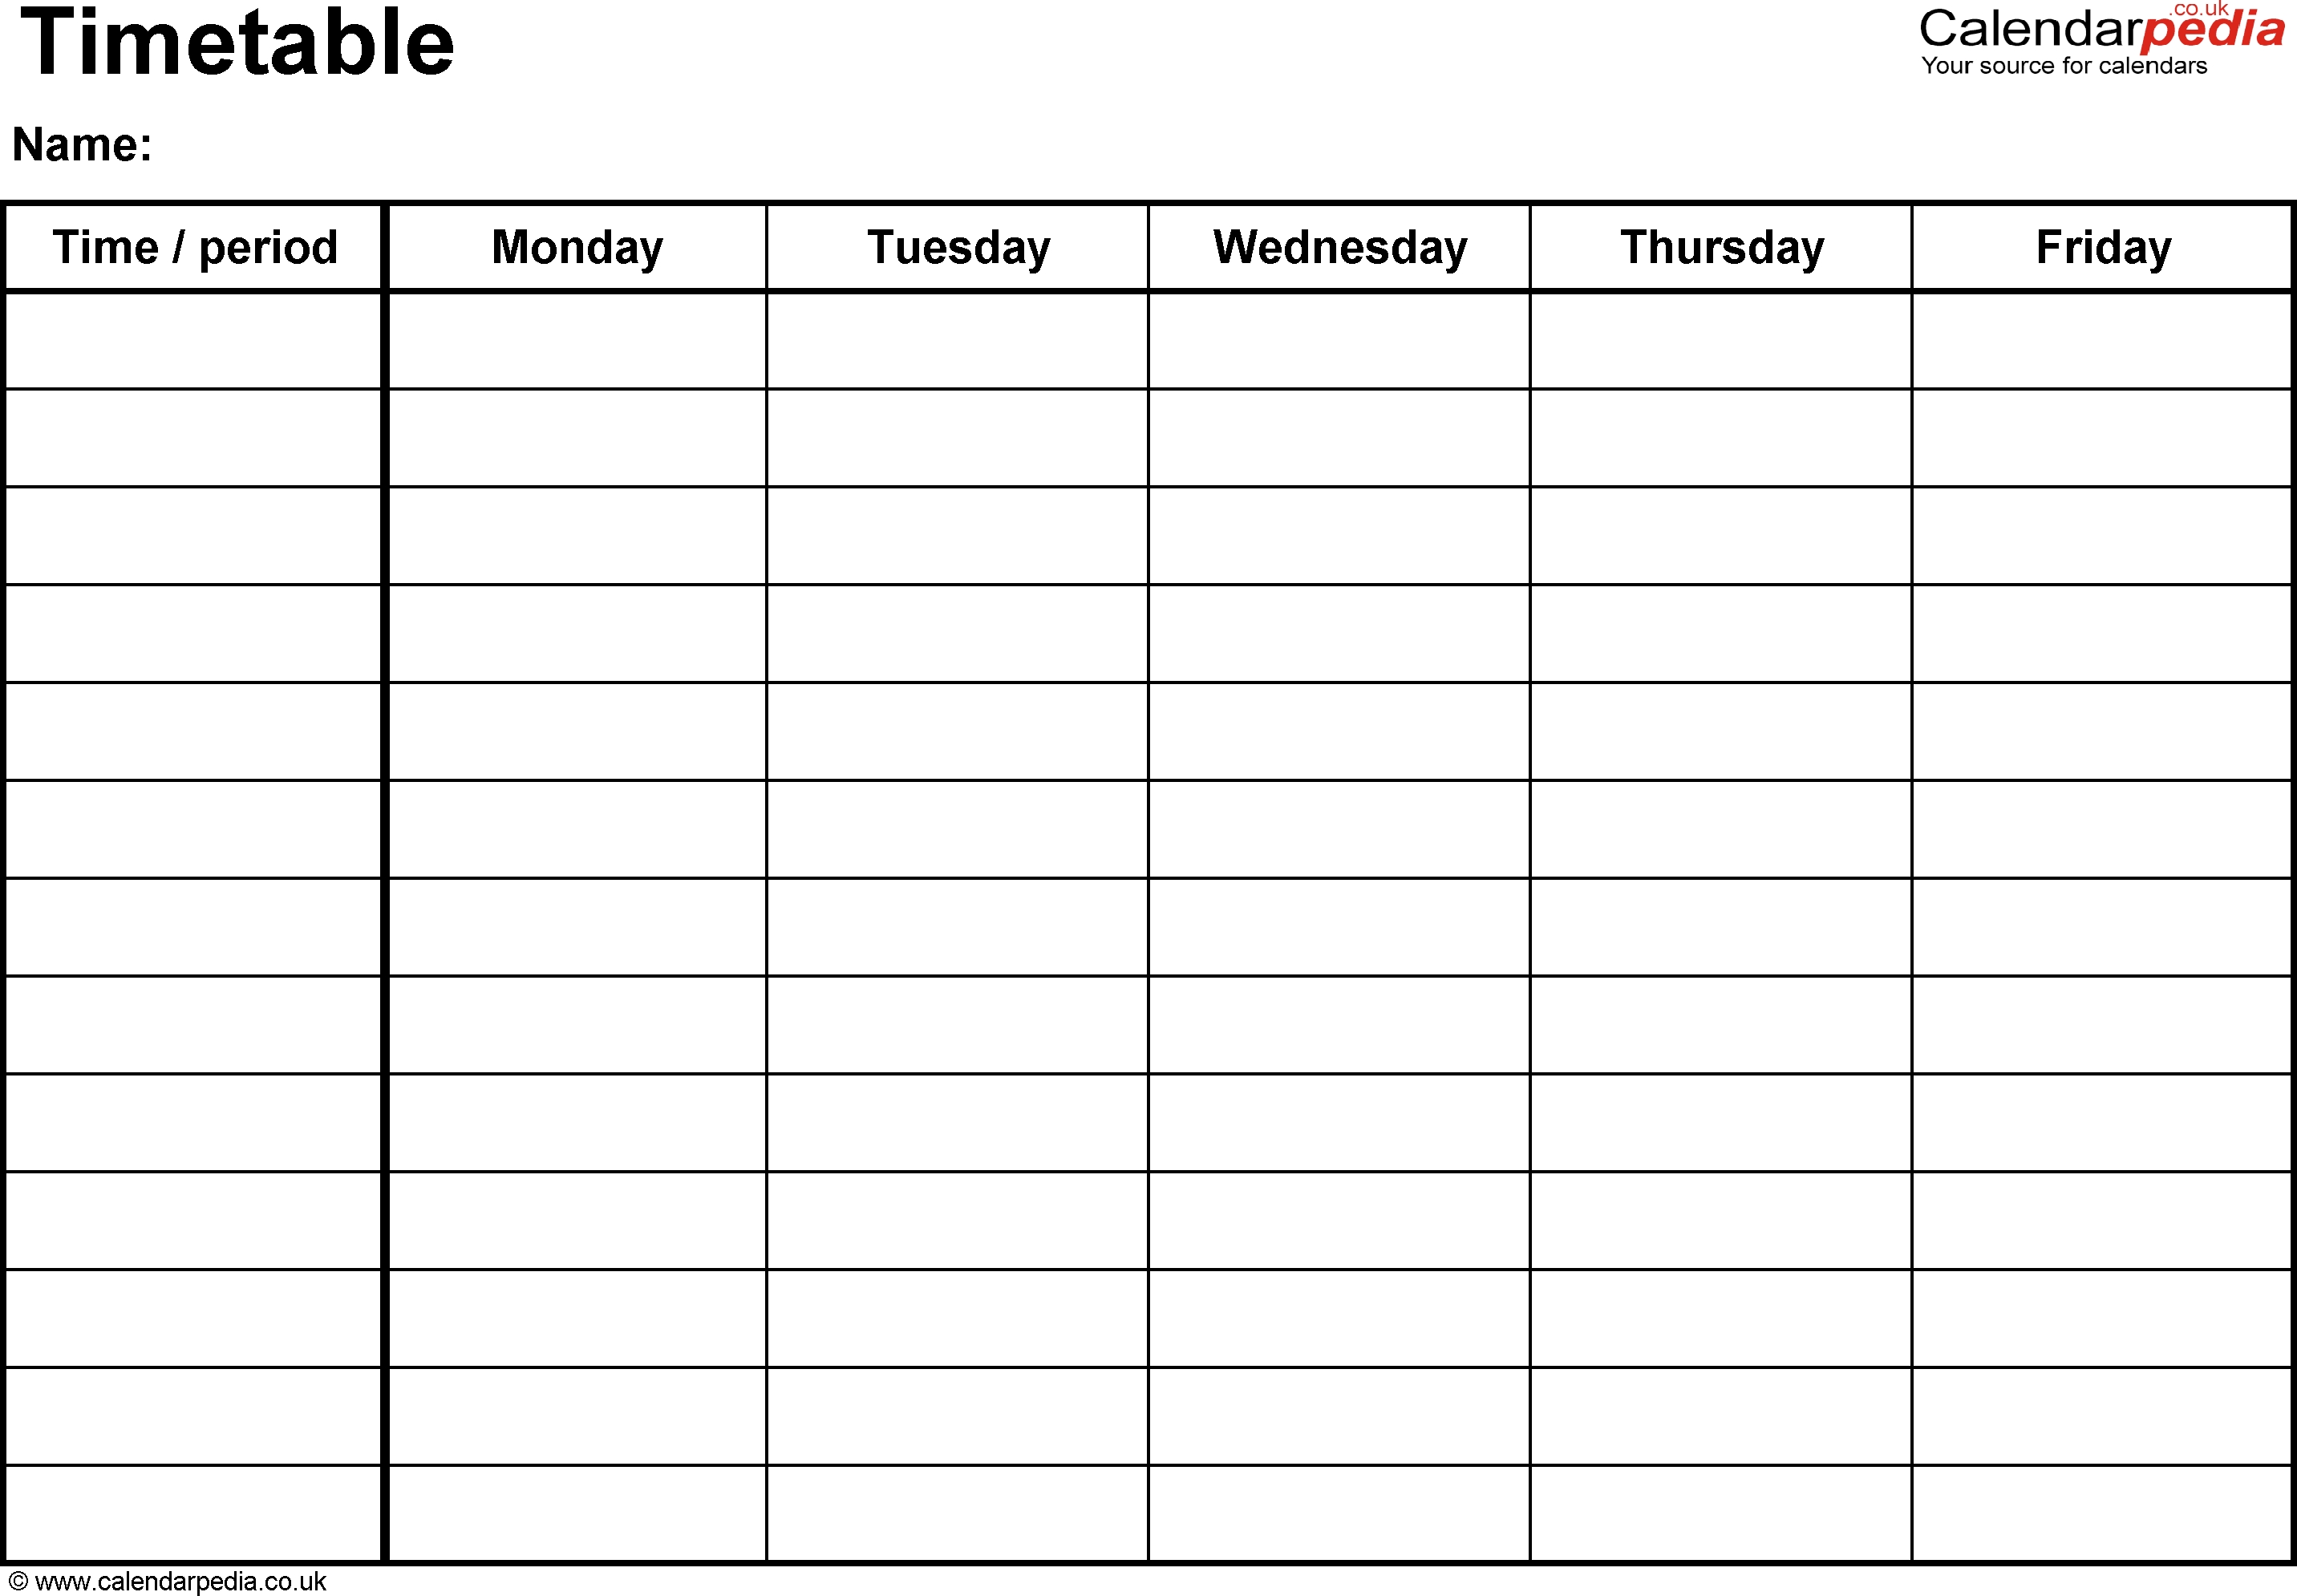 Timetables As Free Printable Templates For Microsoft Word regarding Monday Through Friday Blank Schedule Print Out